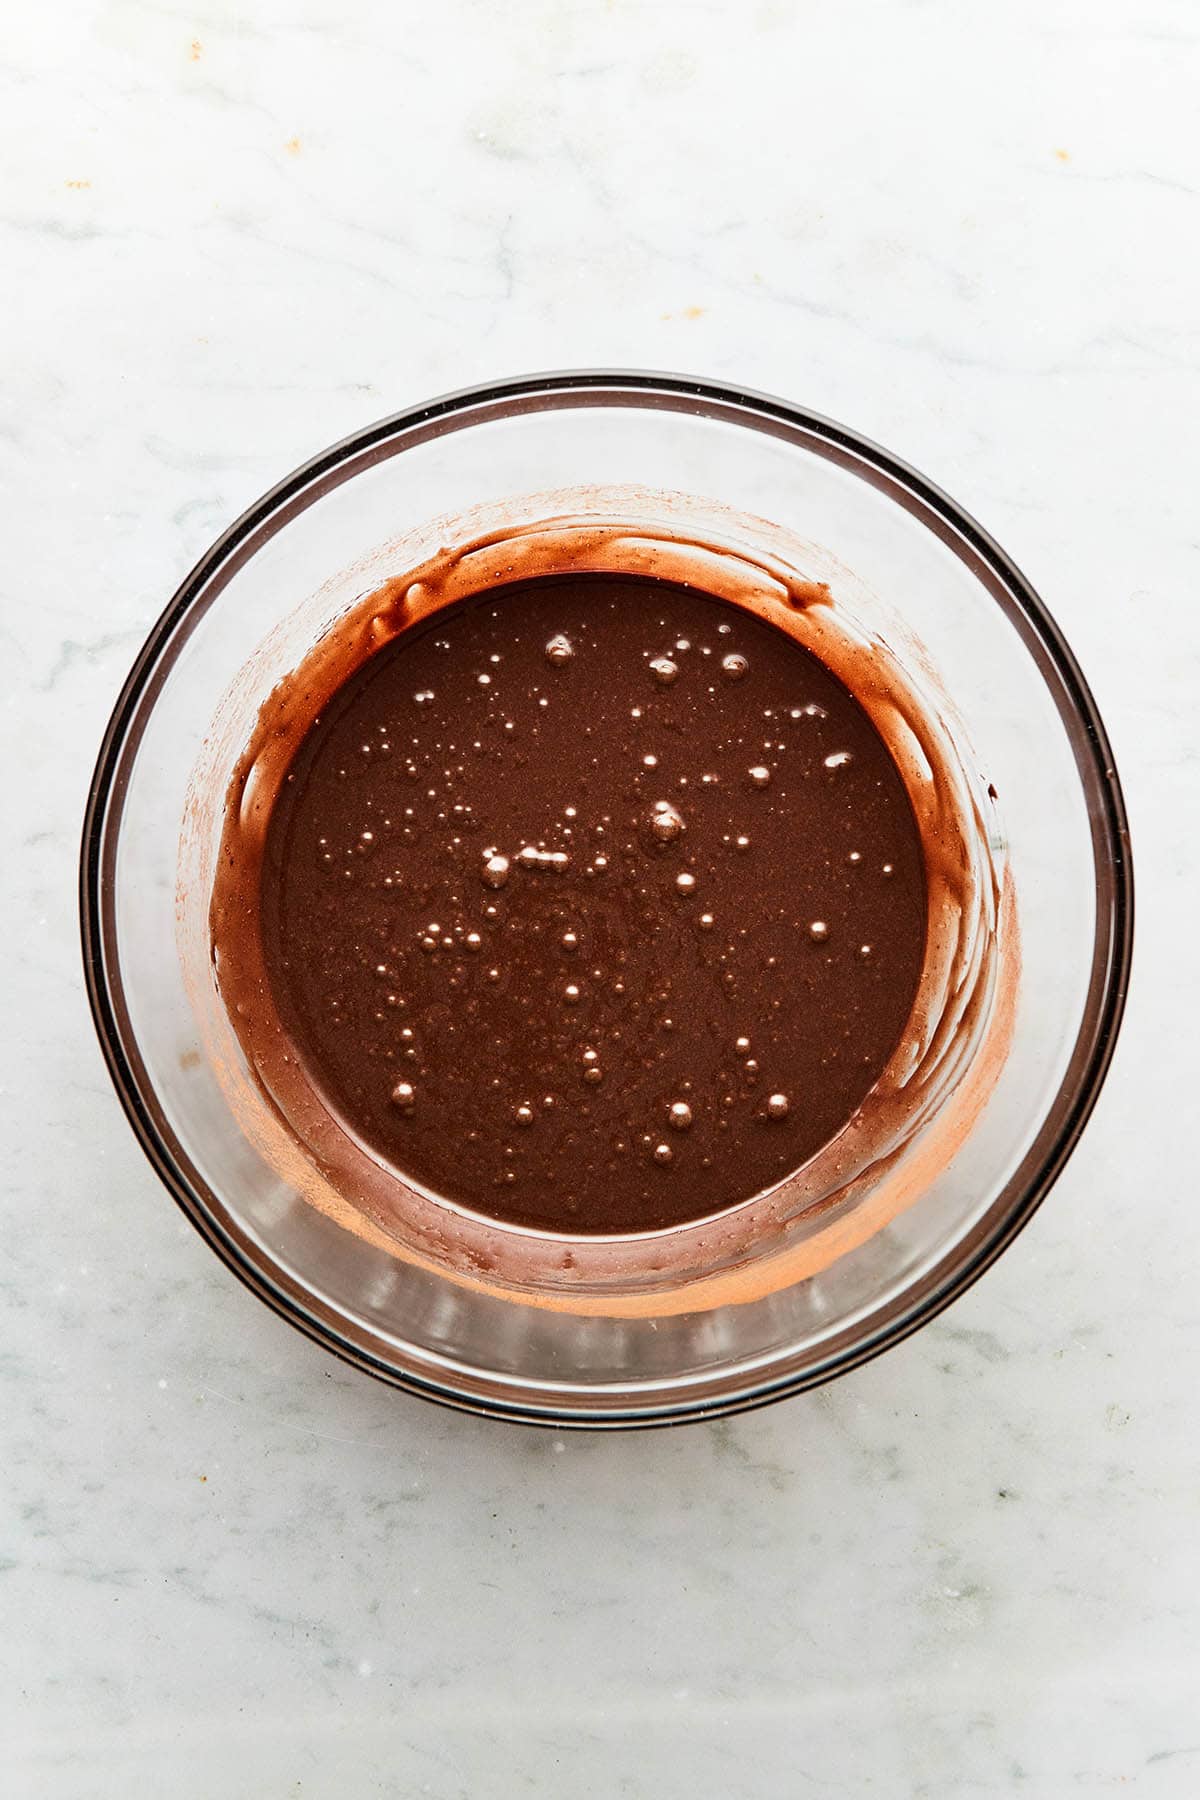 A bowl of chocolate batter.